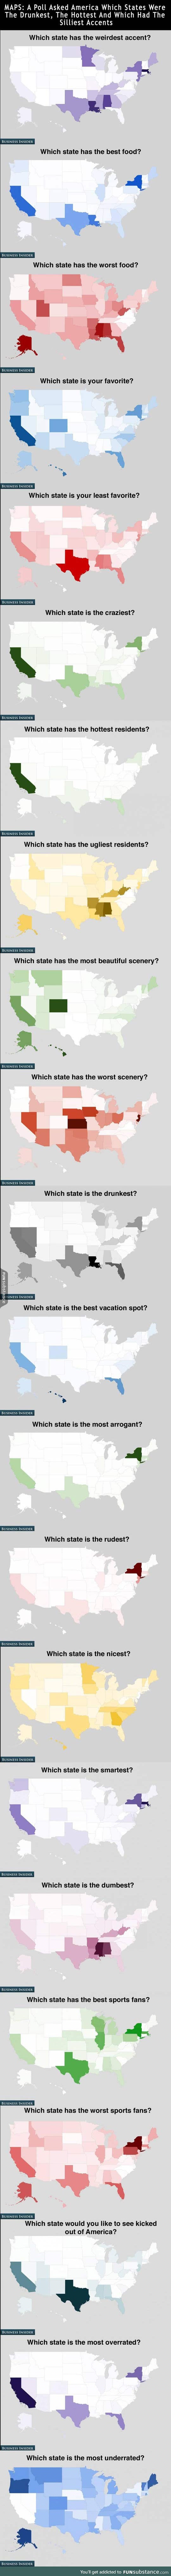 How americans feel about every state